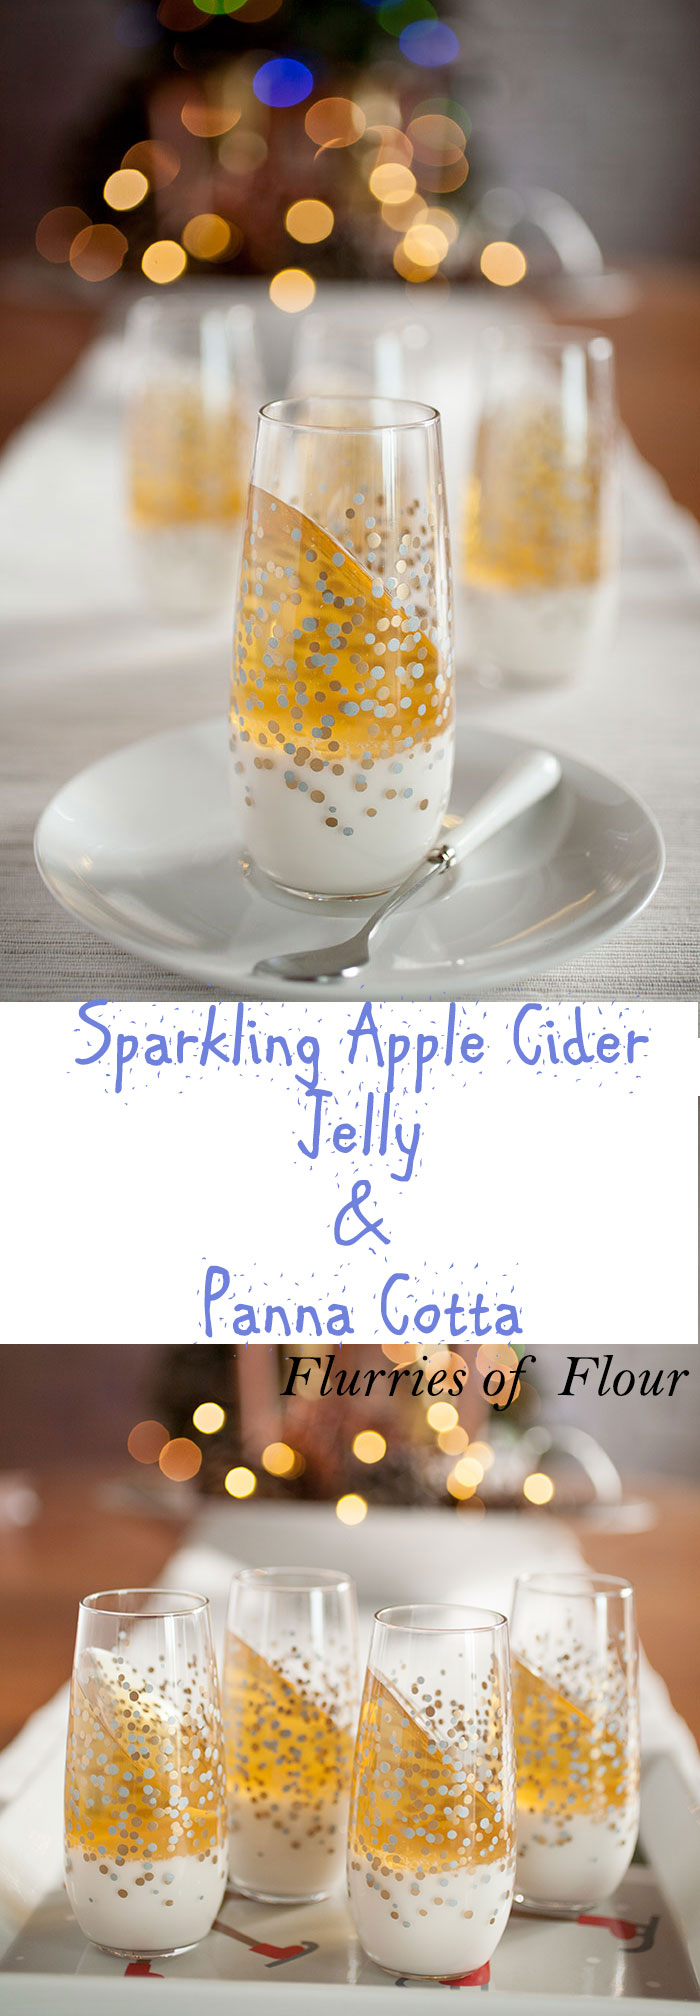 This apple cider jelly and panna cotta takes sweet, effervescent sparkling apple cider gelatin and mixes it with mellow, creamy panna cotta. It’s what holiday dessert dreams are made of!